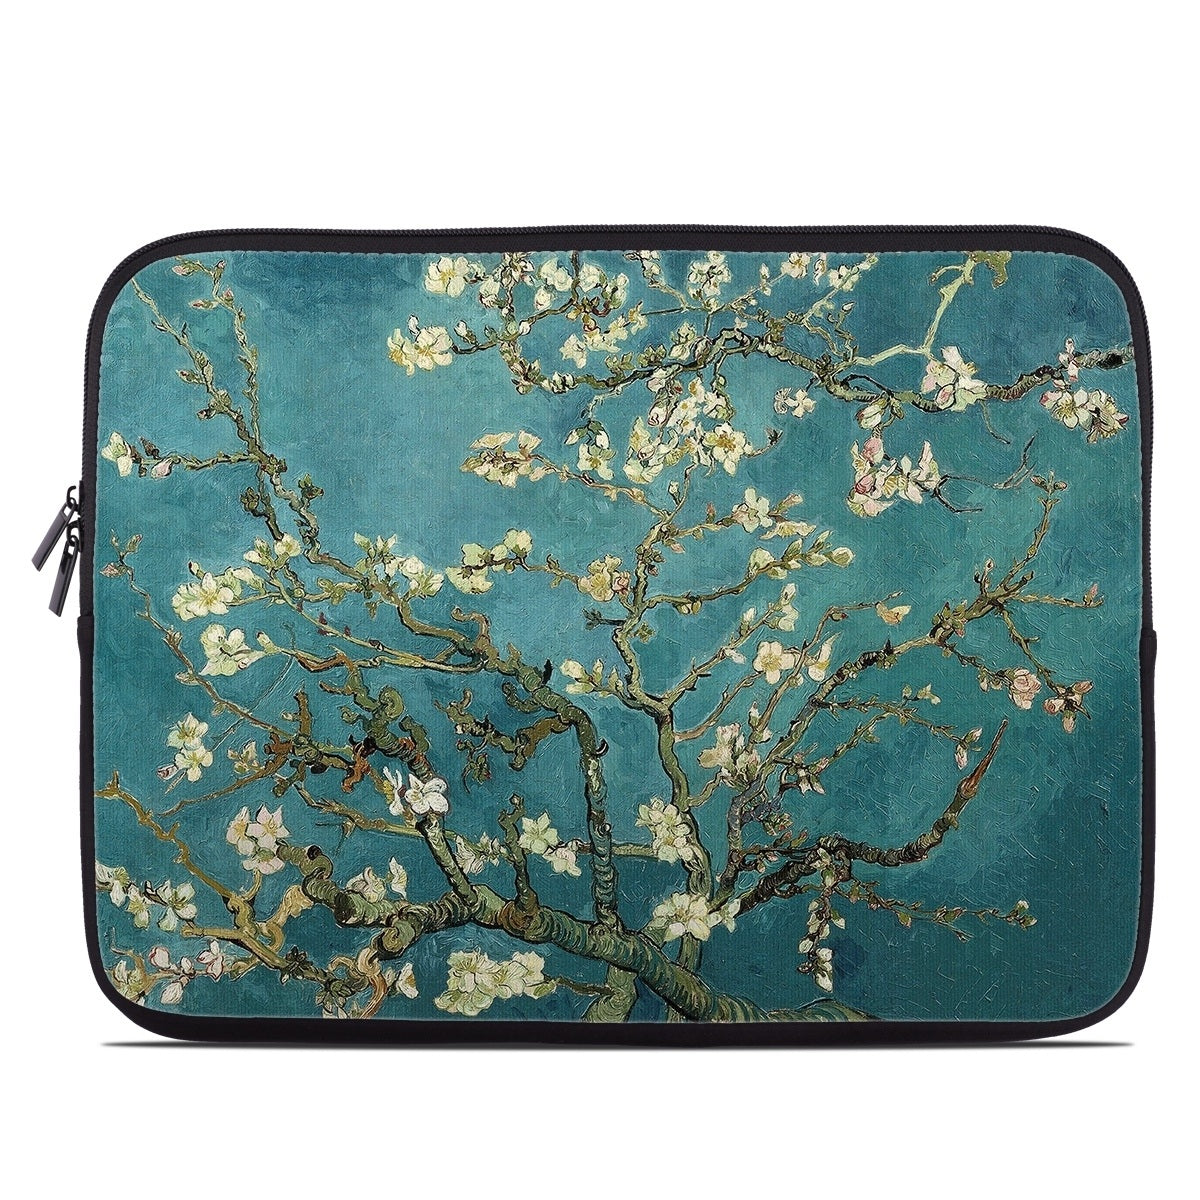 Blossoming Almond Tree - Laptop Sleeve